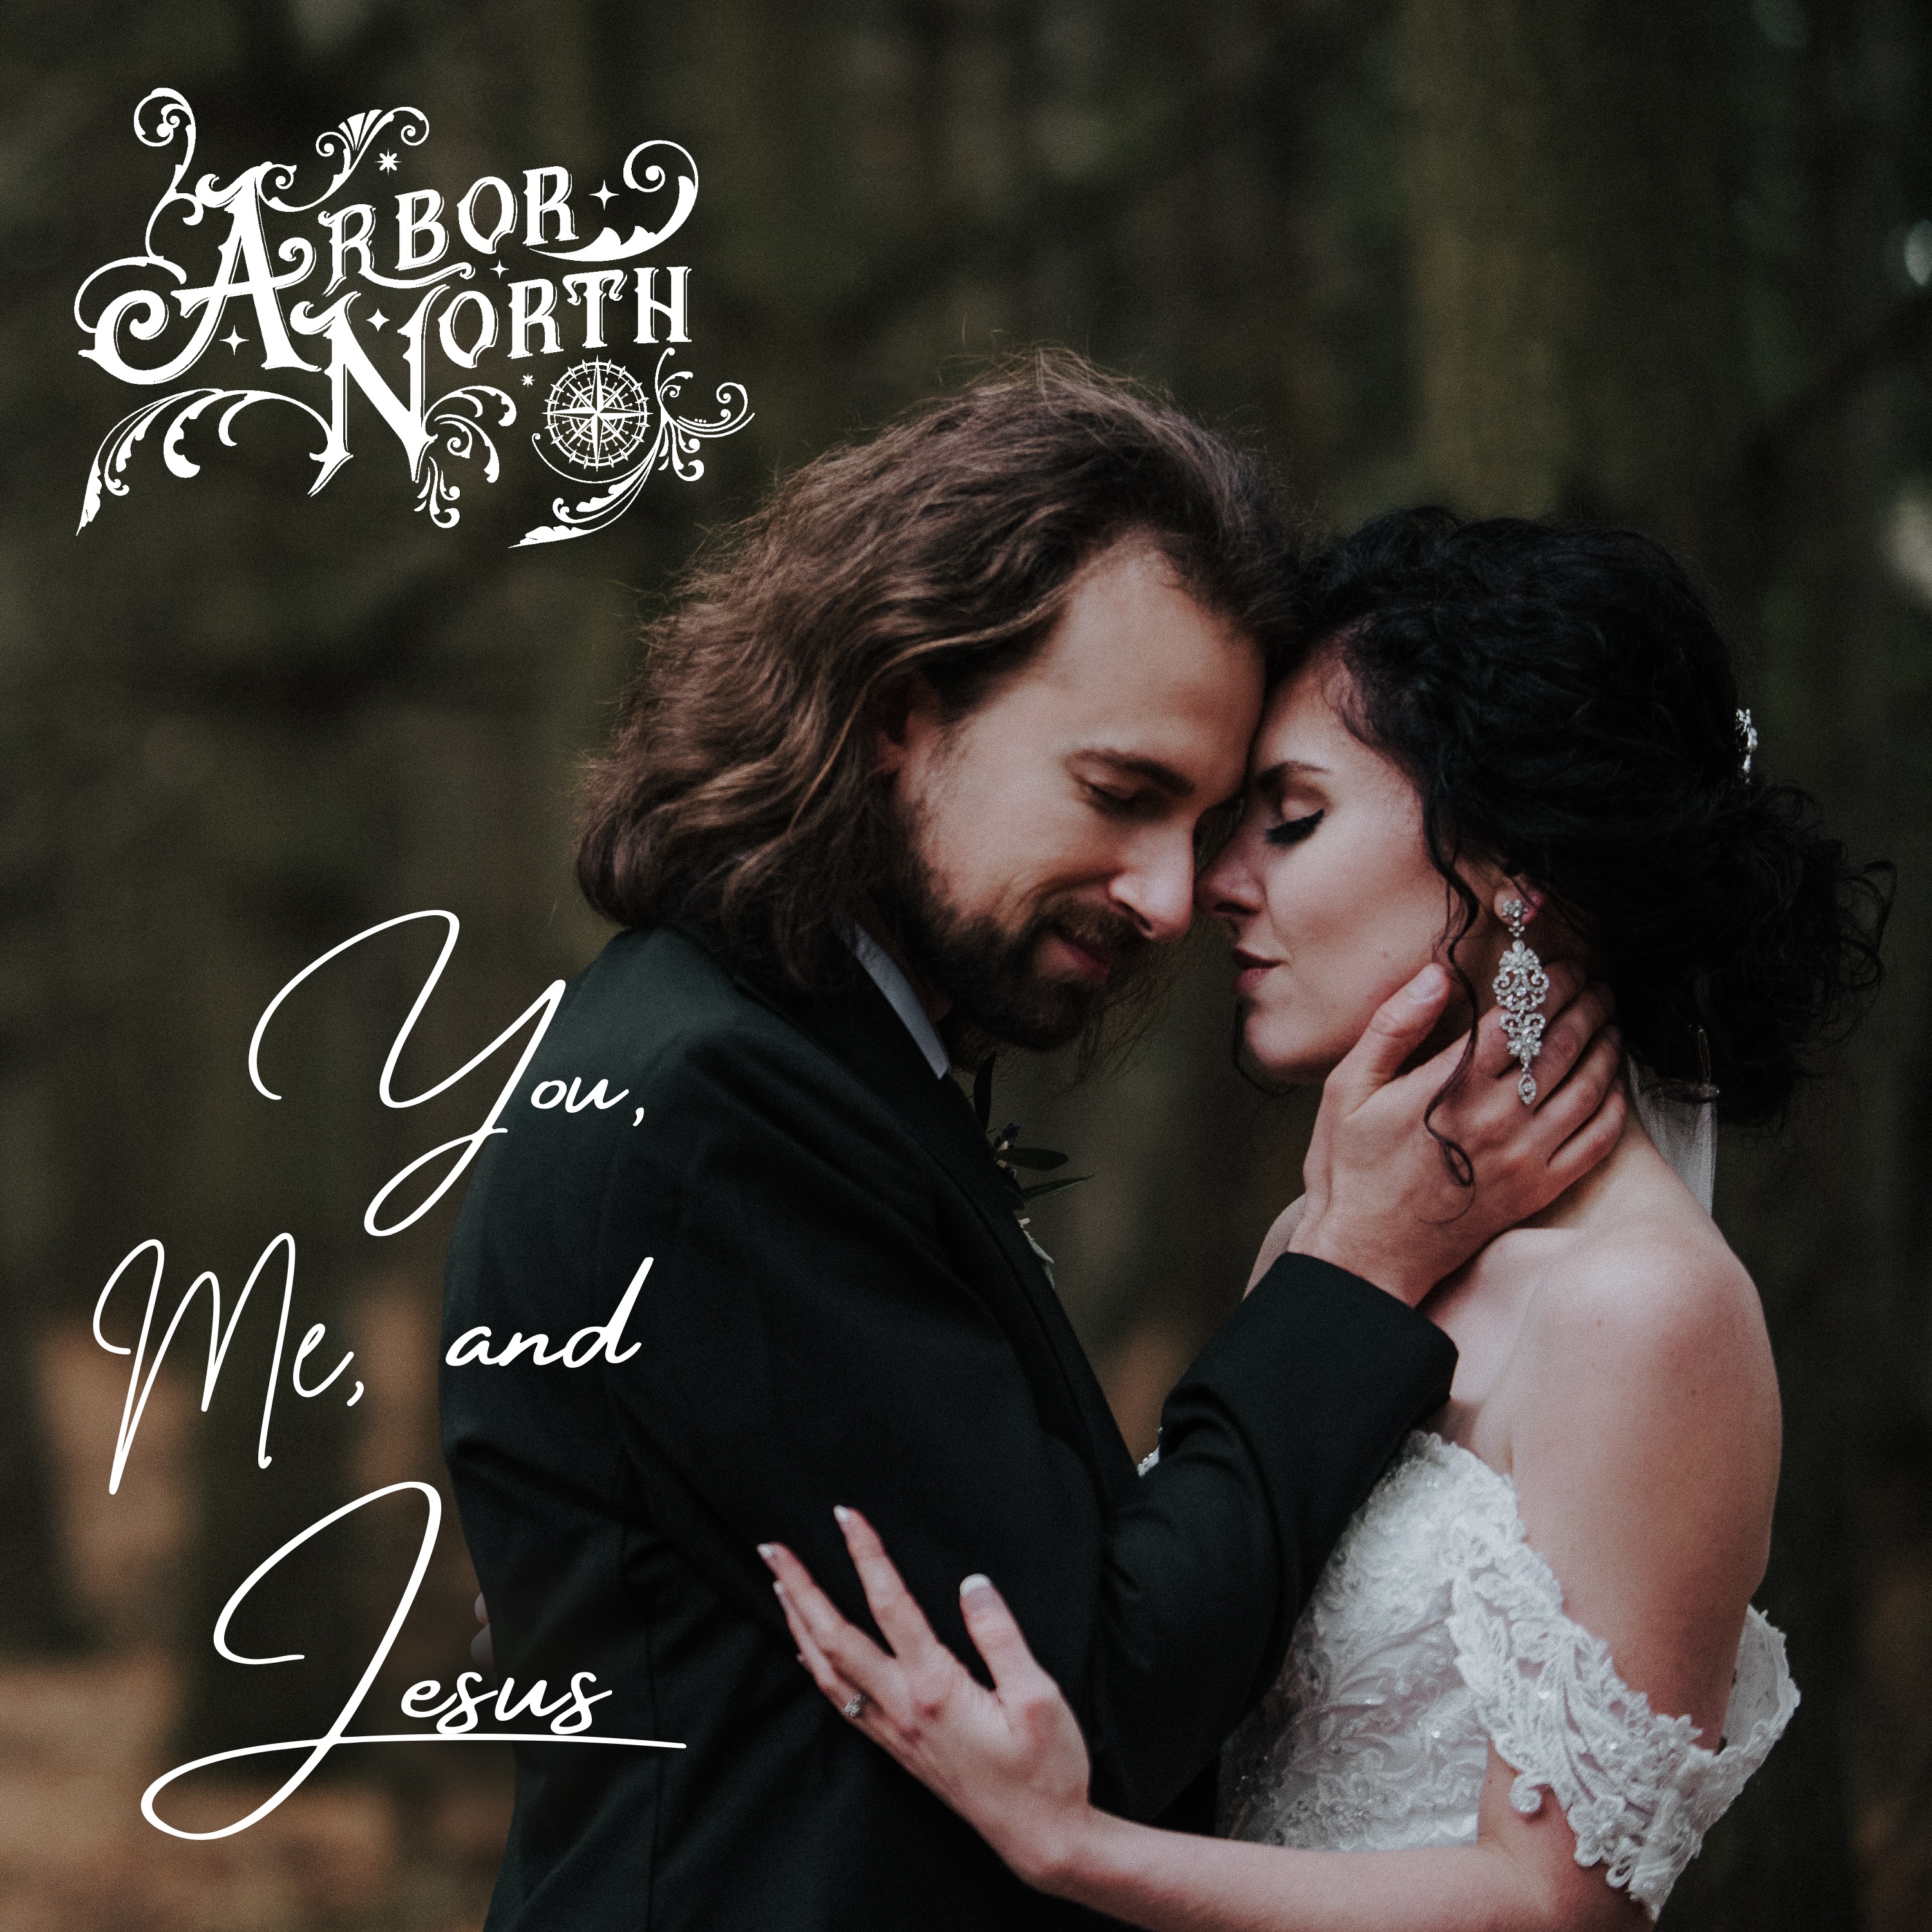 Art for You Me and Jesus by Arbor North